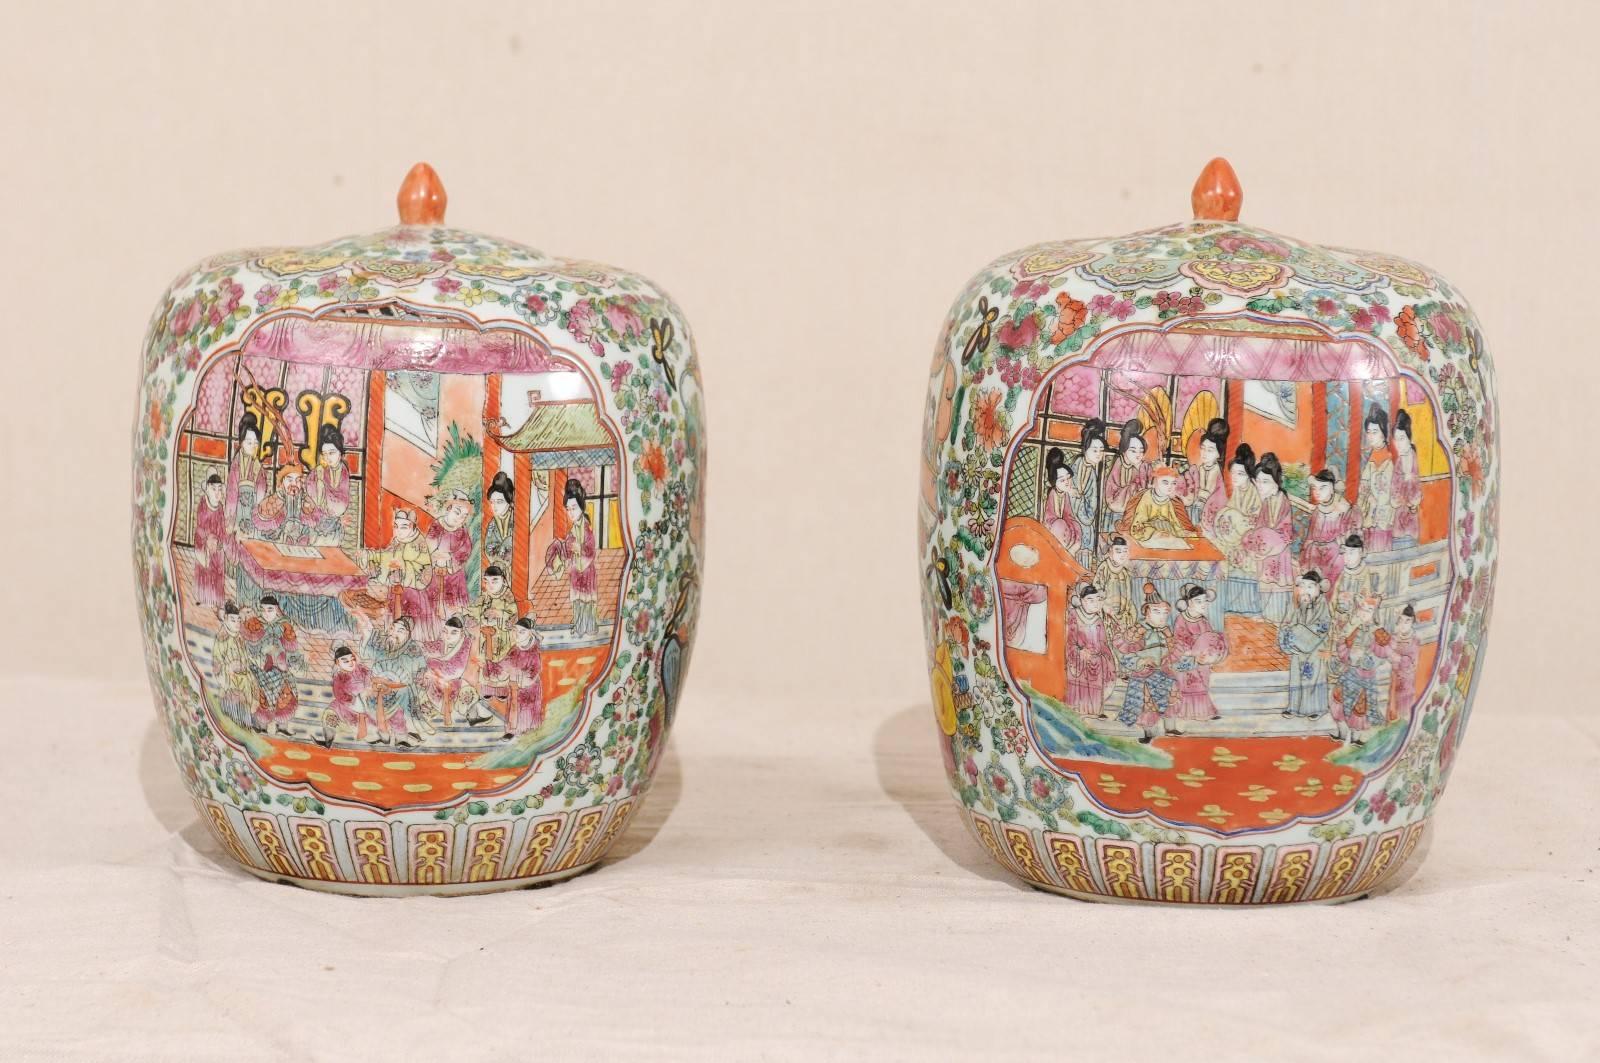 A pair of Chinese Famille Rose porcelain lidded jars from the mid-20th century. This pair of Chinese porcelain jars with lids have a bulbous form, decorated in the typical Famille Rose palette. The body of the vases are decorated with two large